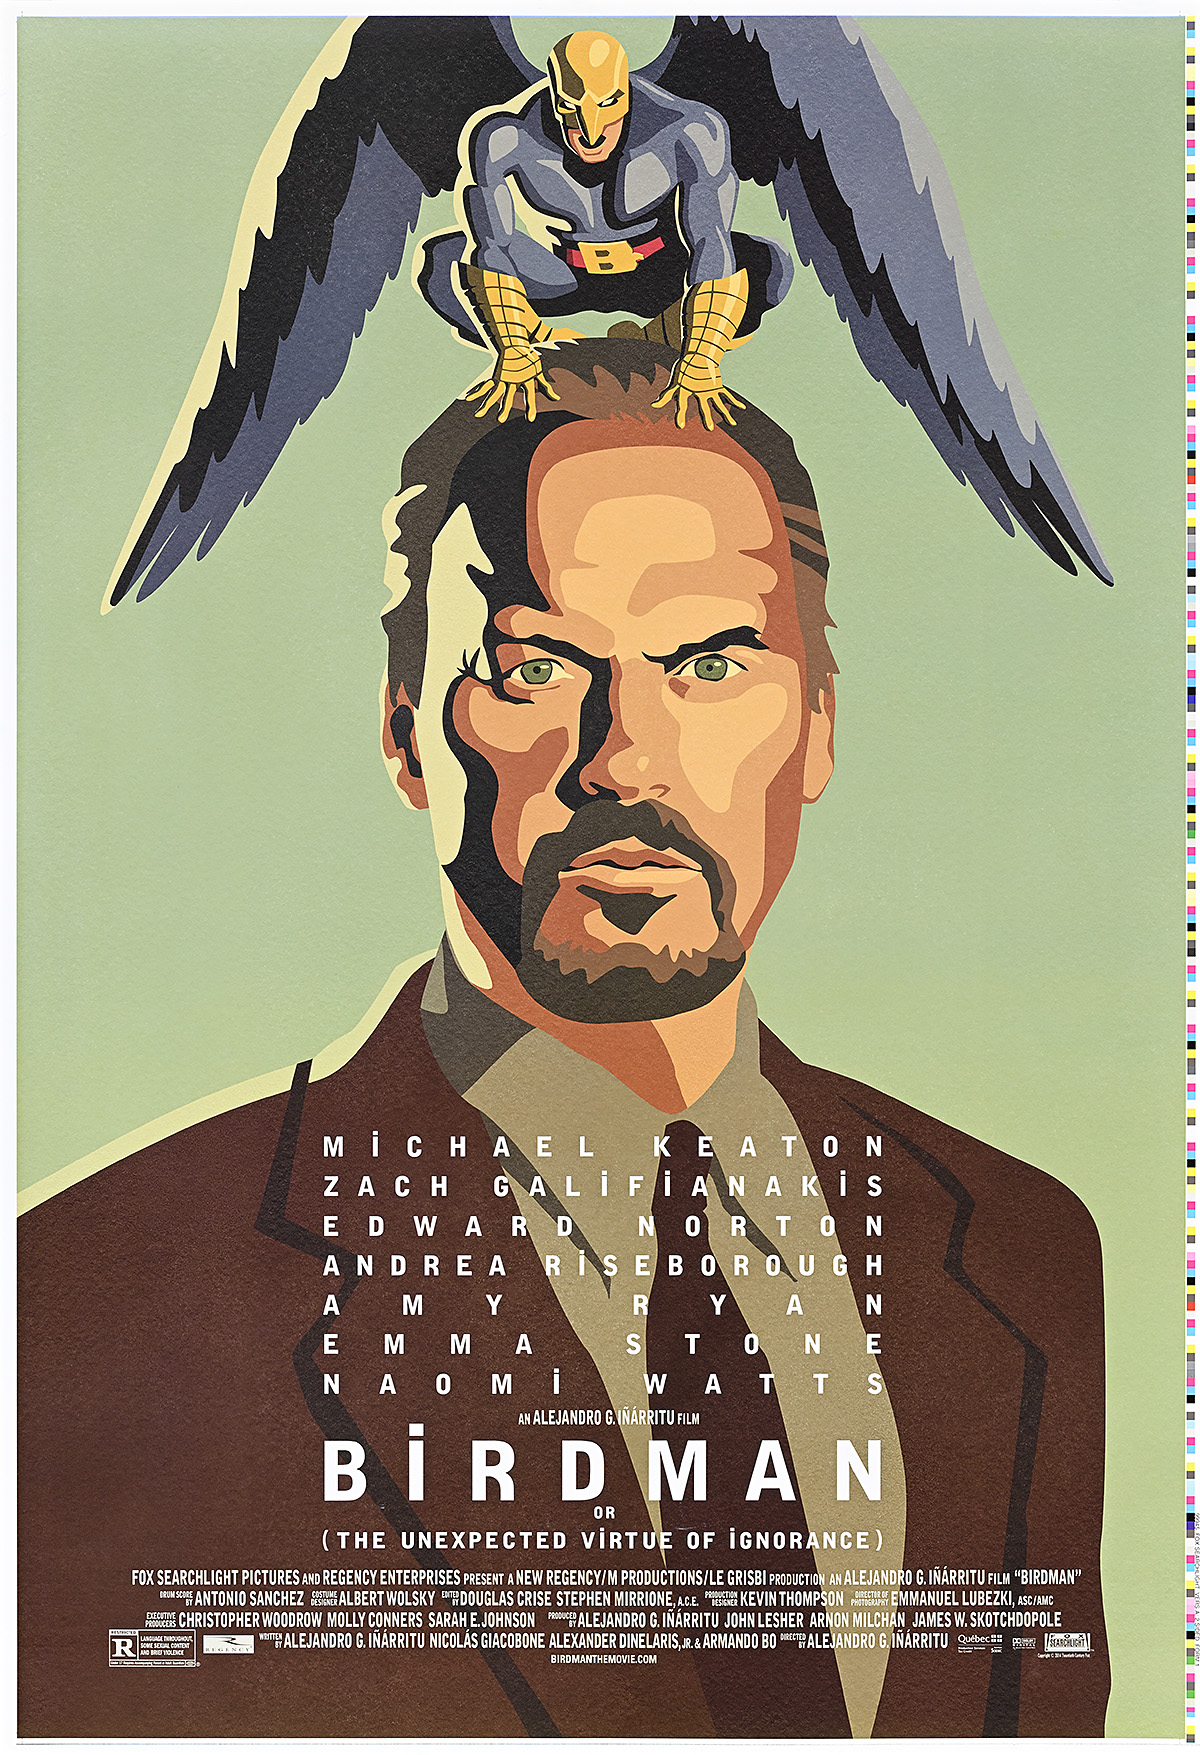 A illustration-style poster of a man with a superhero-looking bird man crouched on his head.